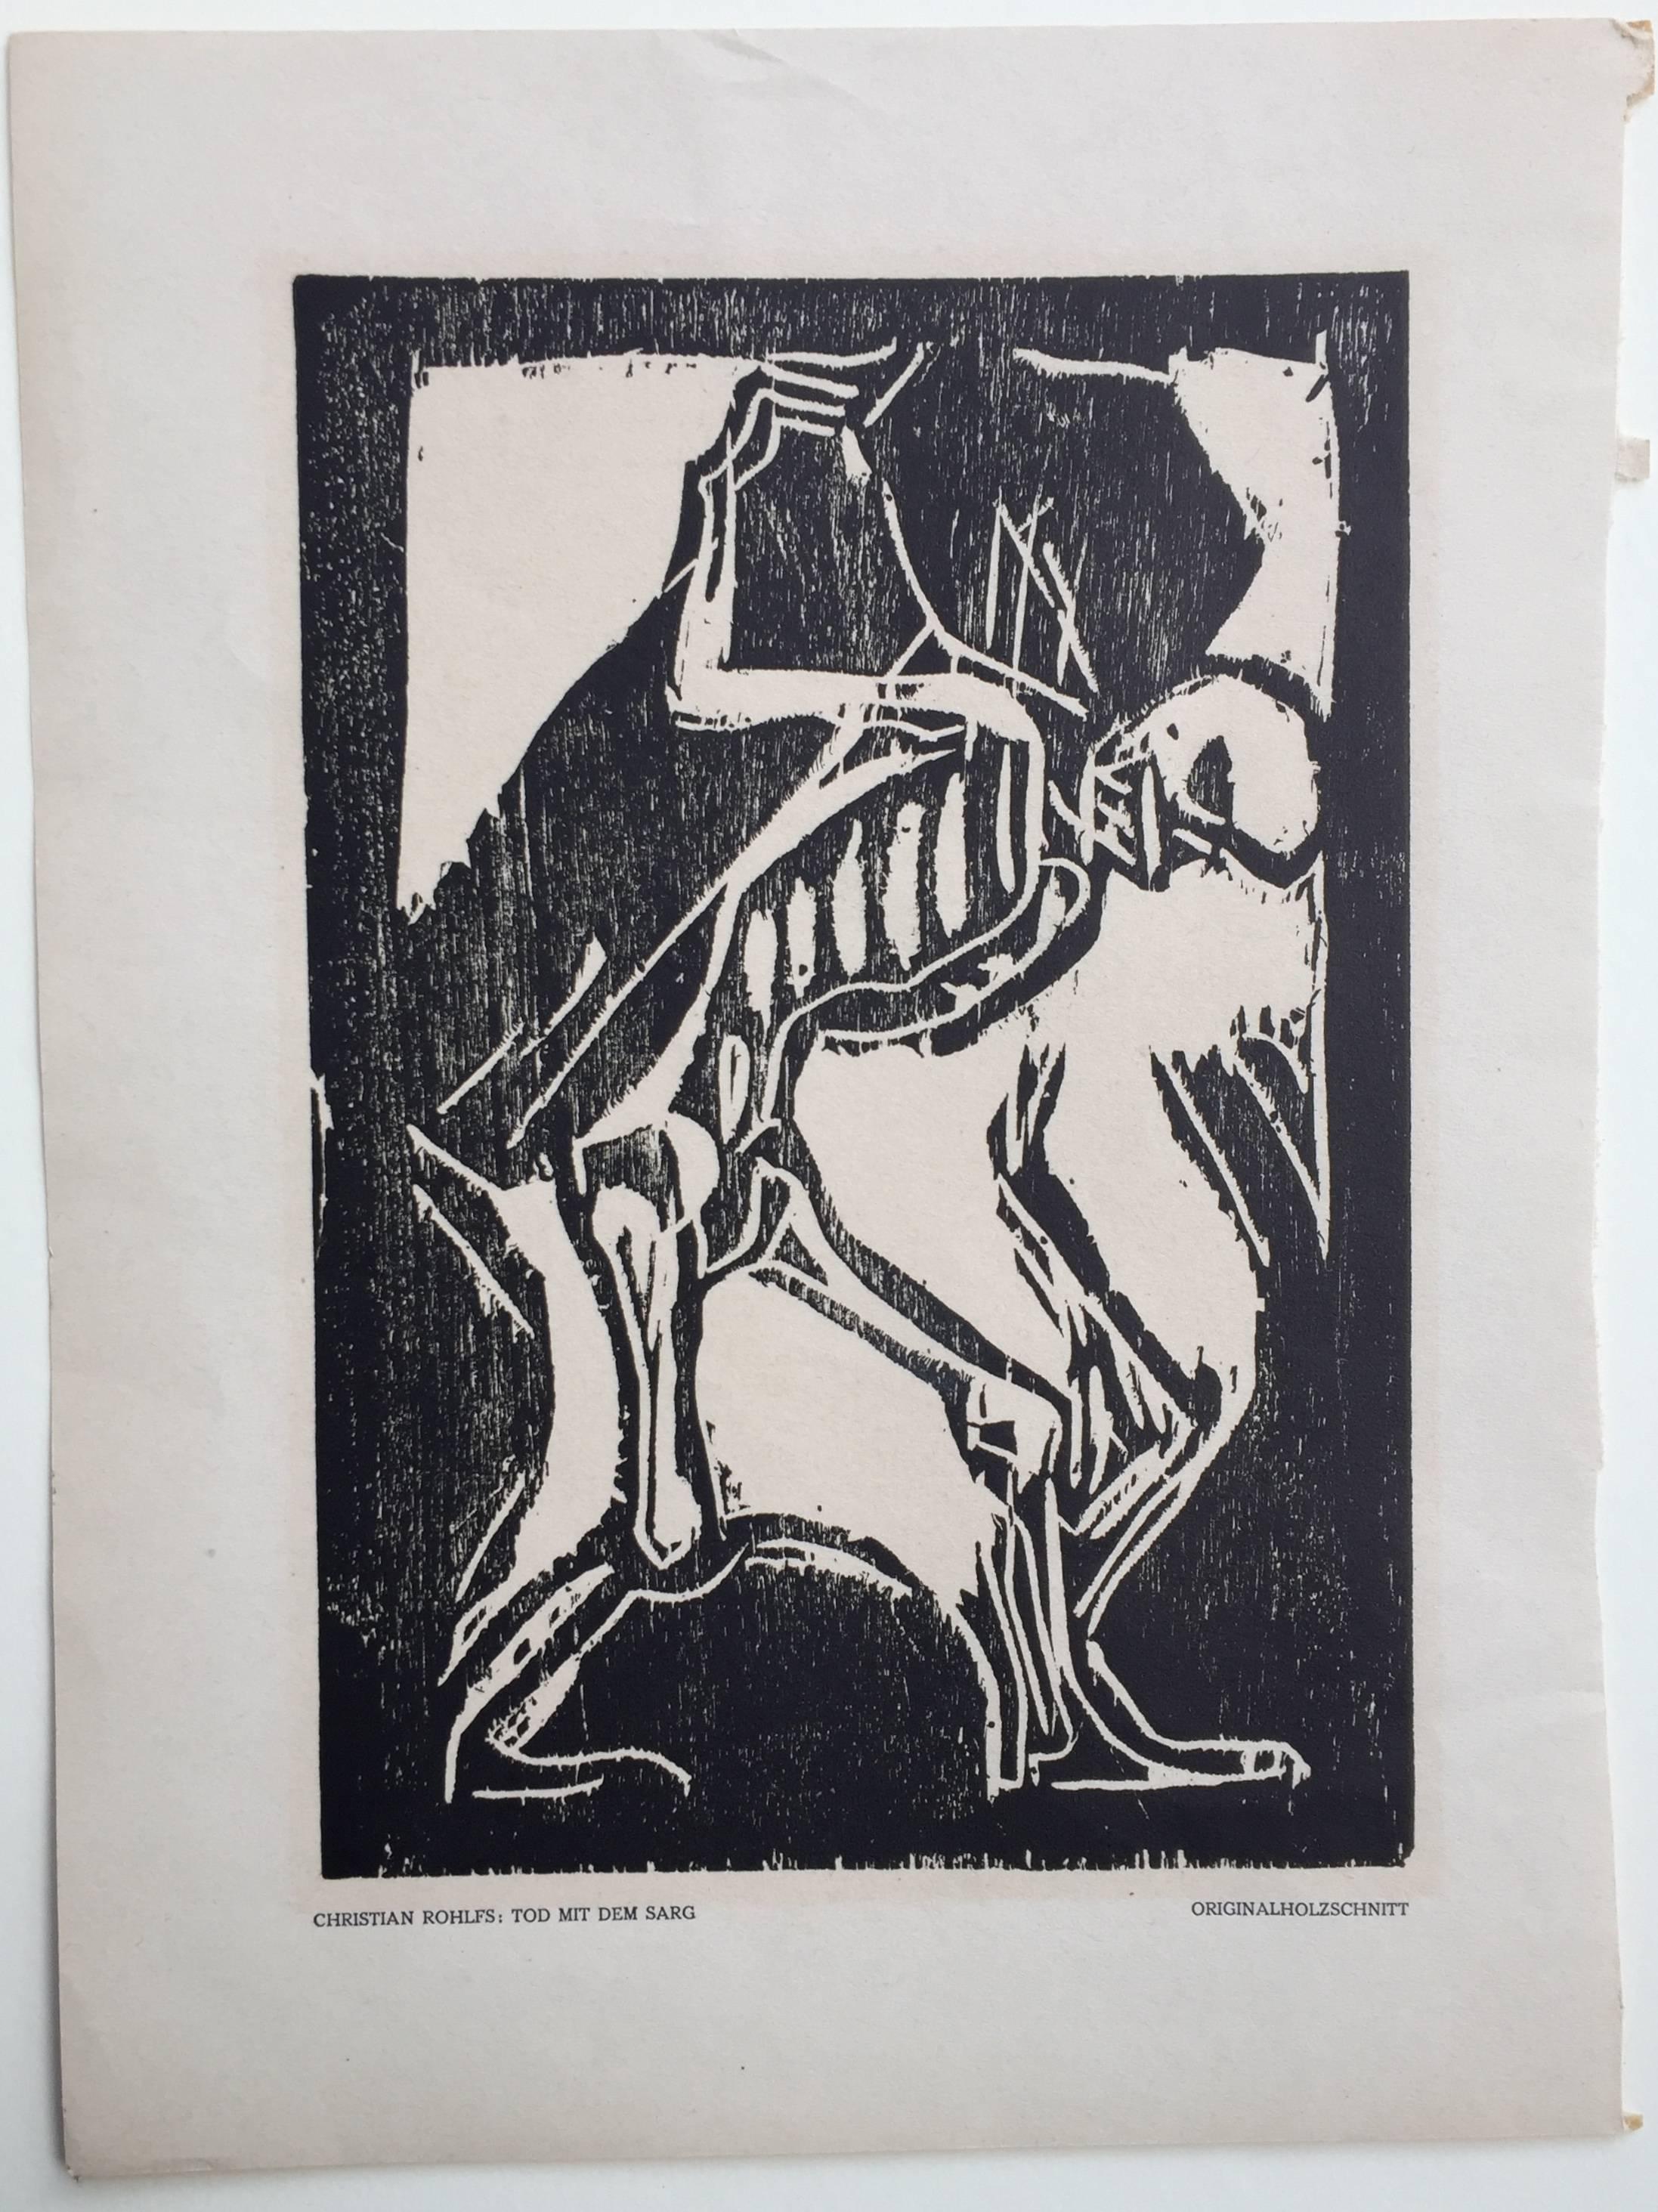 TOD MIT DEM SARG (Death with a Coffin) - Print by Christian Rohlfs